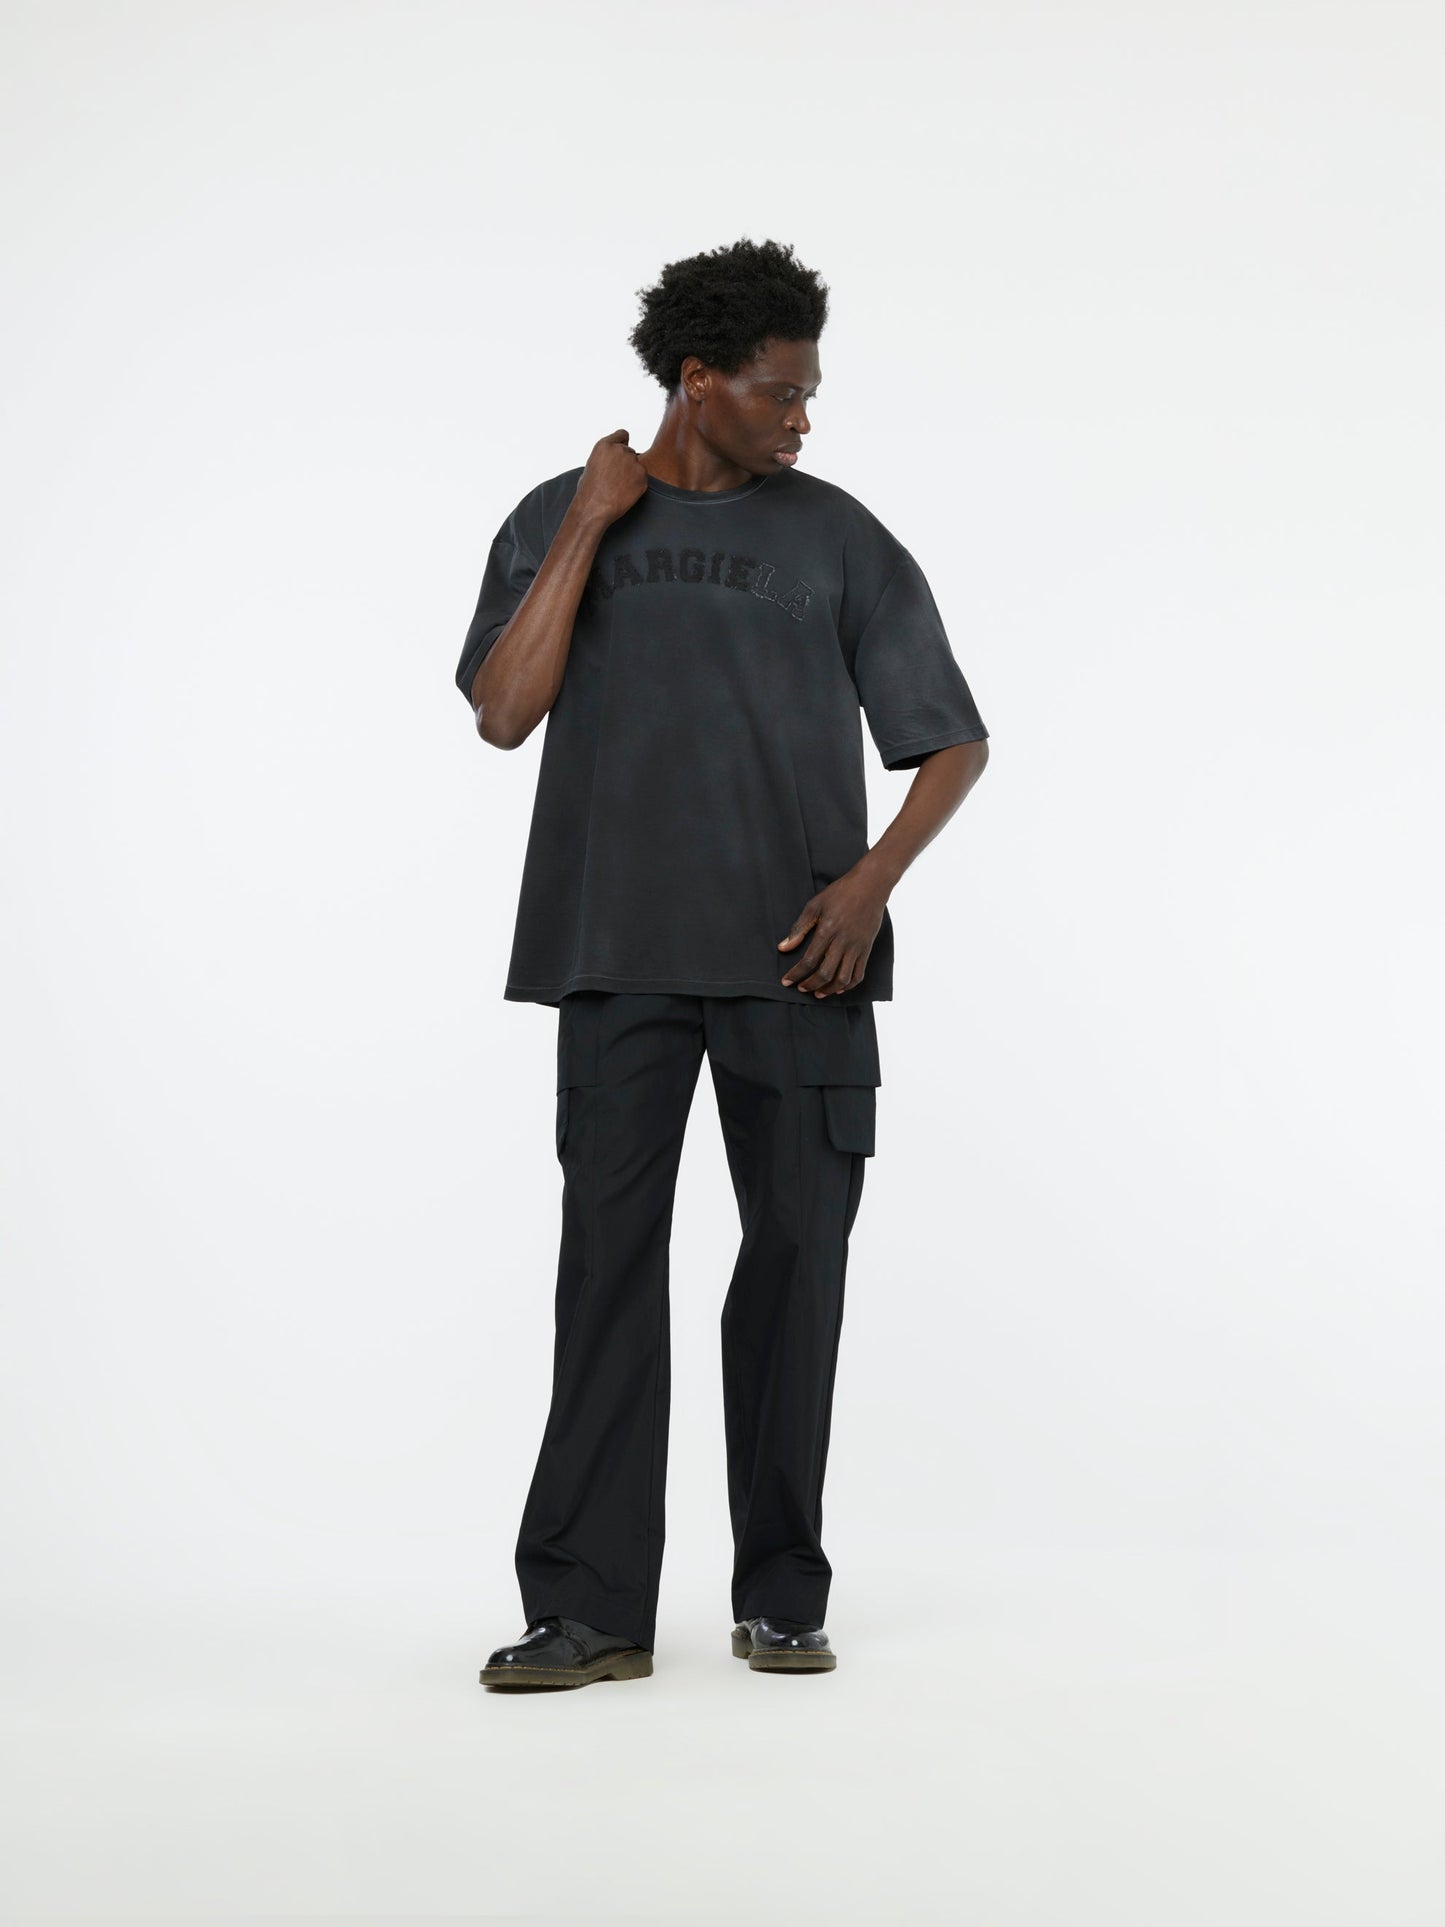 Faded Block Letter Tee (Washed Black)